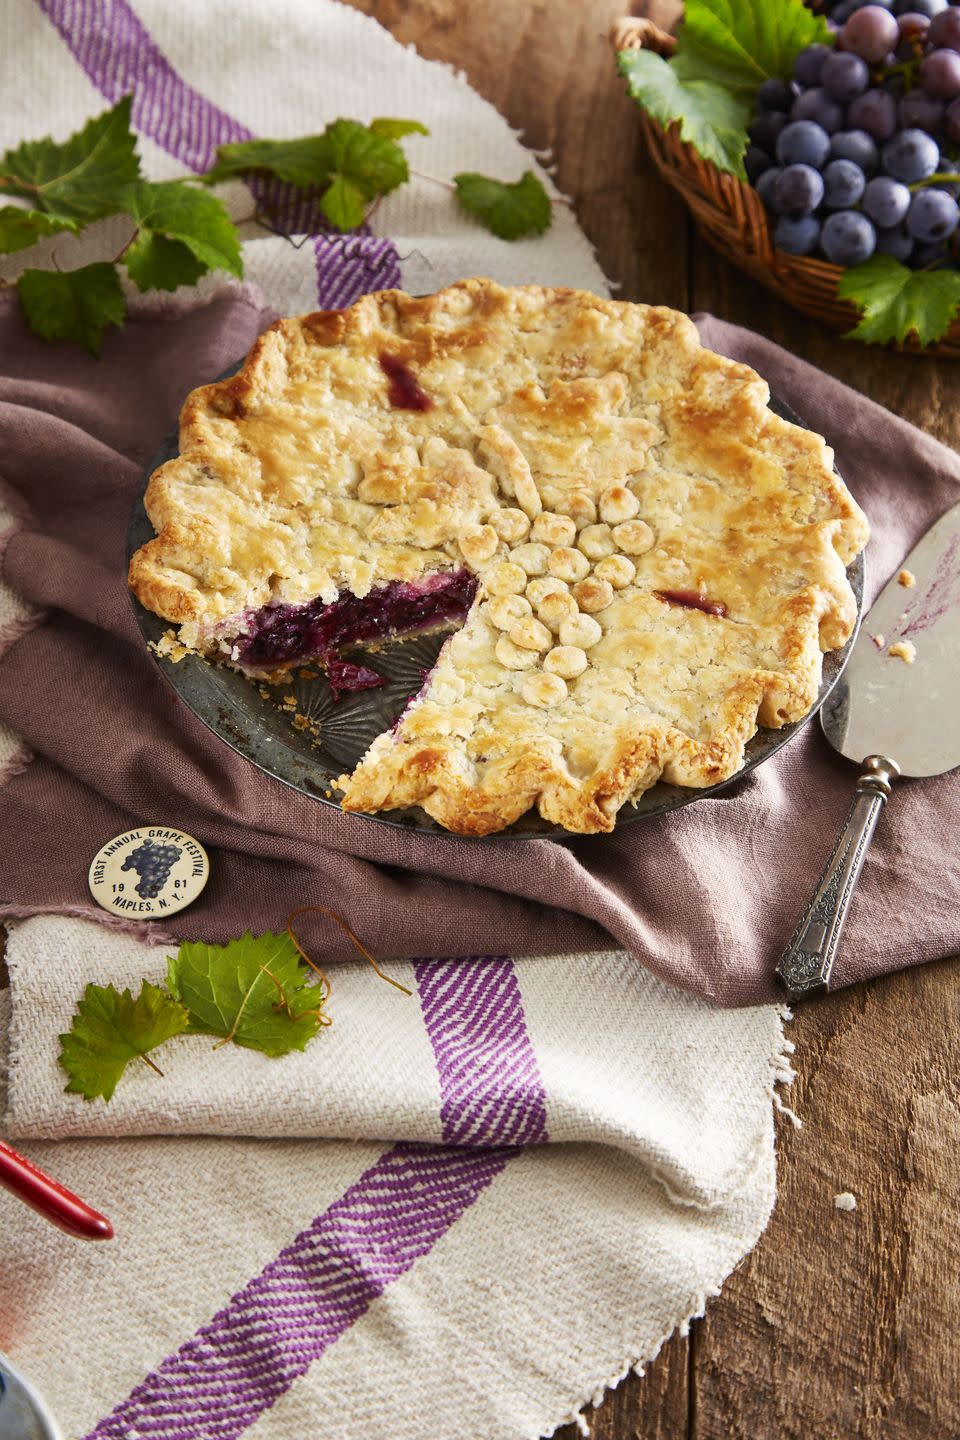 double crust concord grape pie with pie crust decorations on top that resemble a bundle of grapes